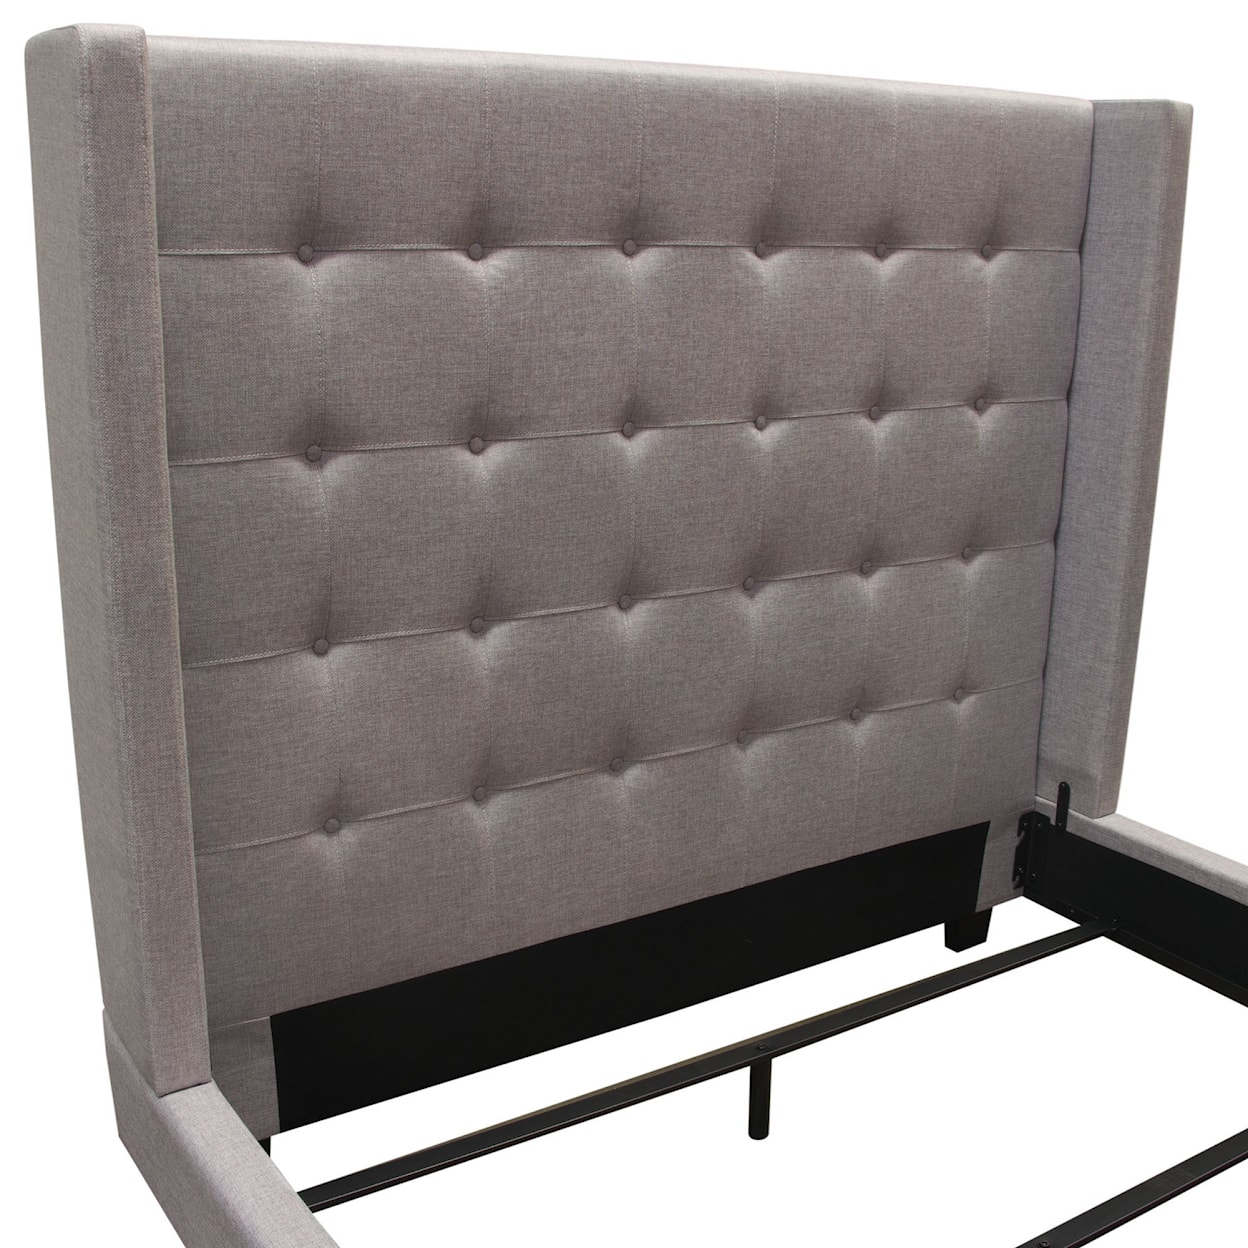 Diamond Sofa Furniture Madison Ave Queen Tufted Wing Bed